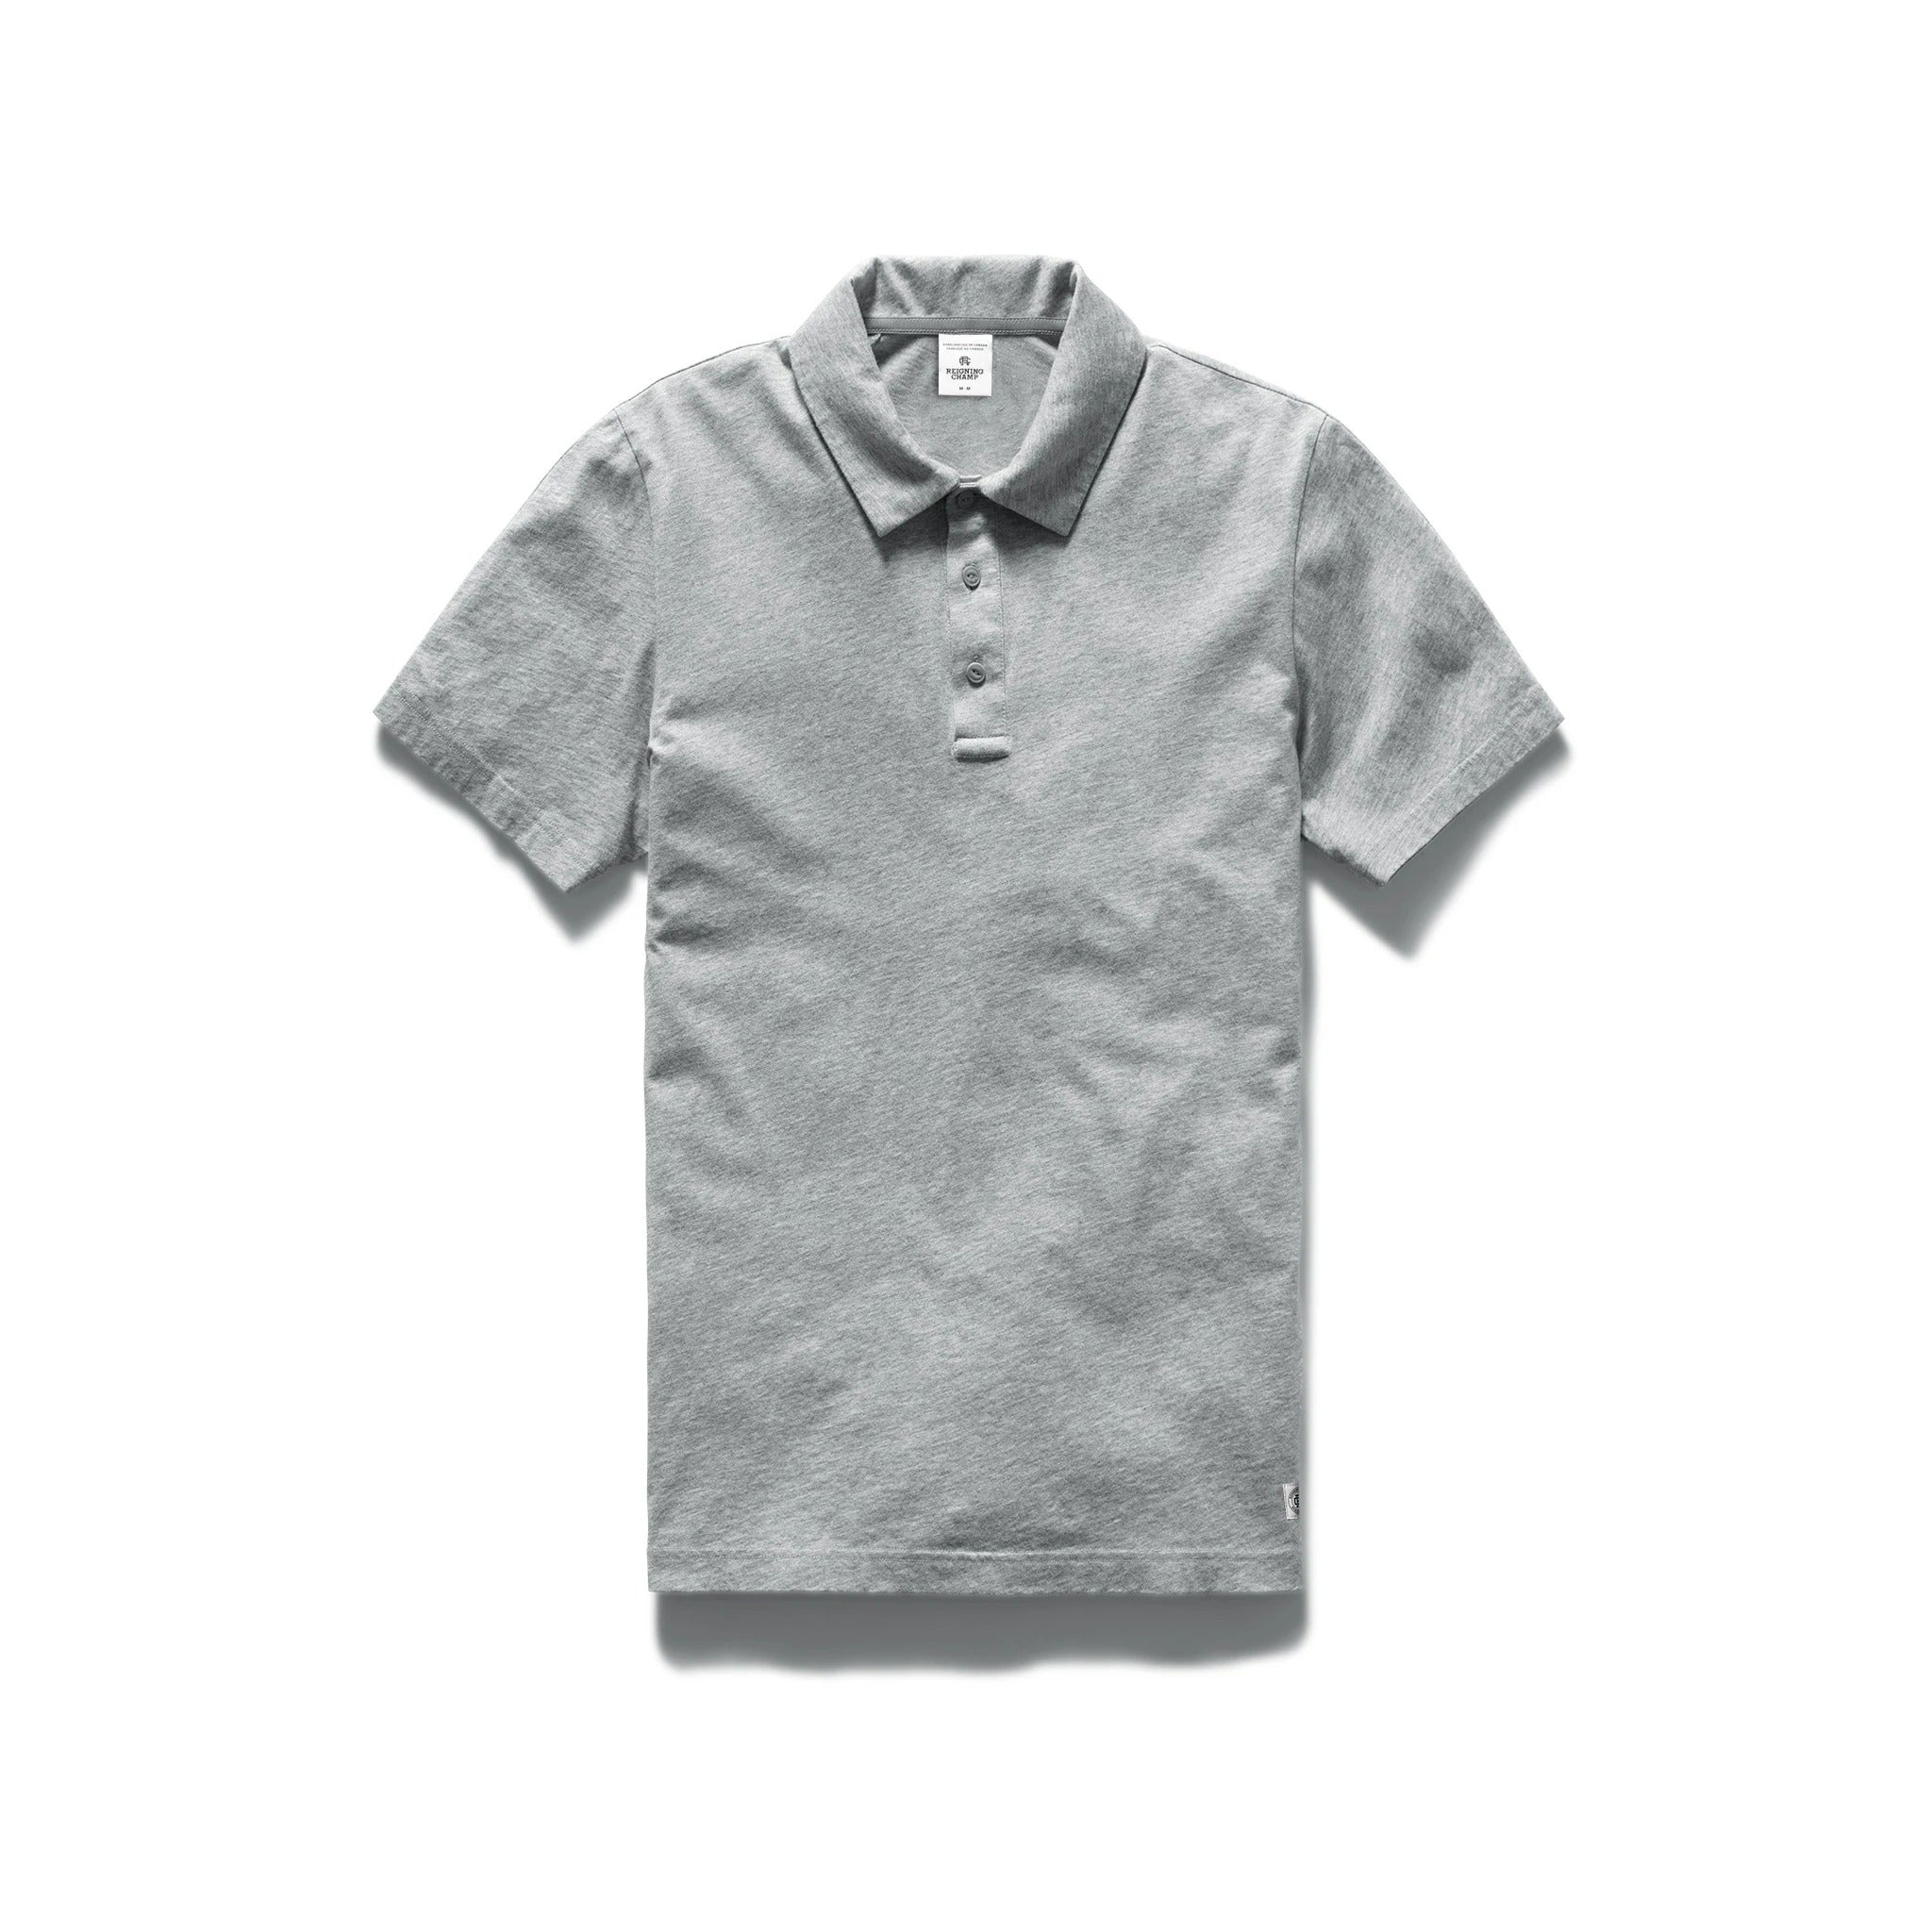 Reigning Champ Men Knit Pima Jersey Polo Heather Grey RC-1180-GRY - TOPS - Canada